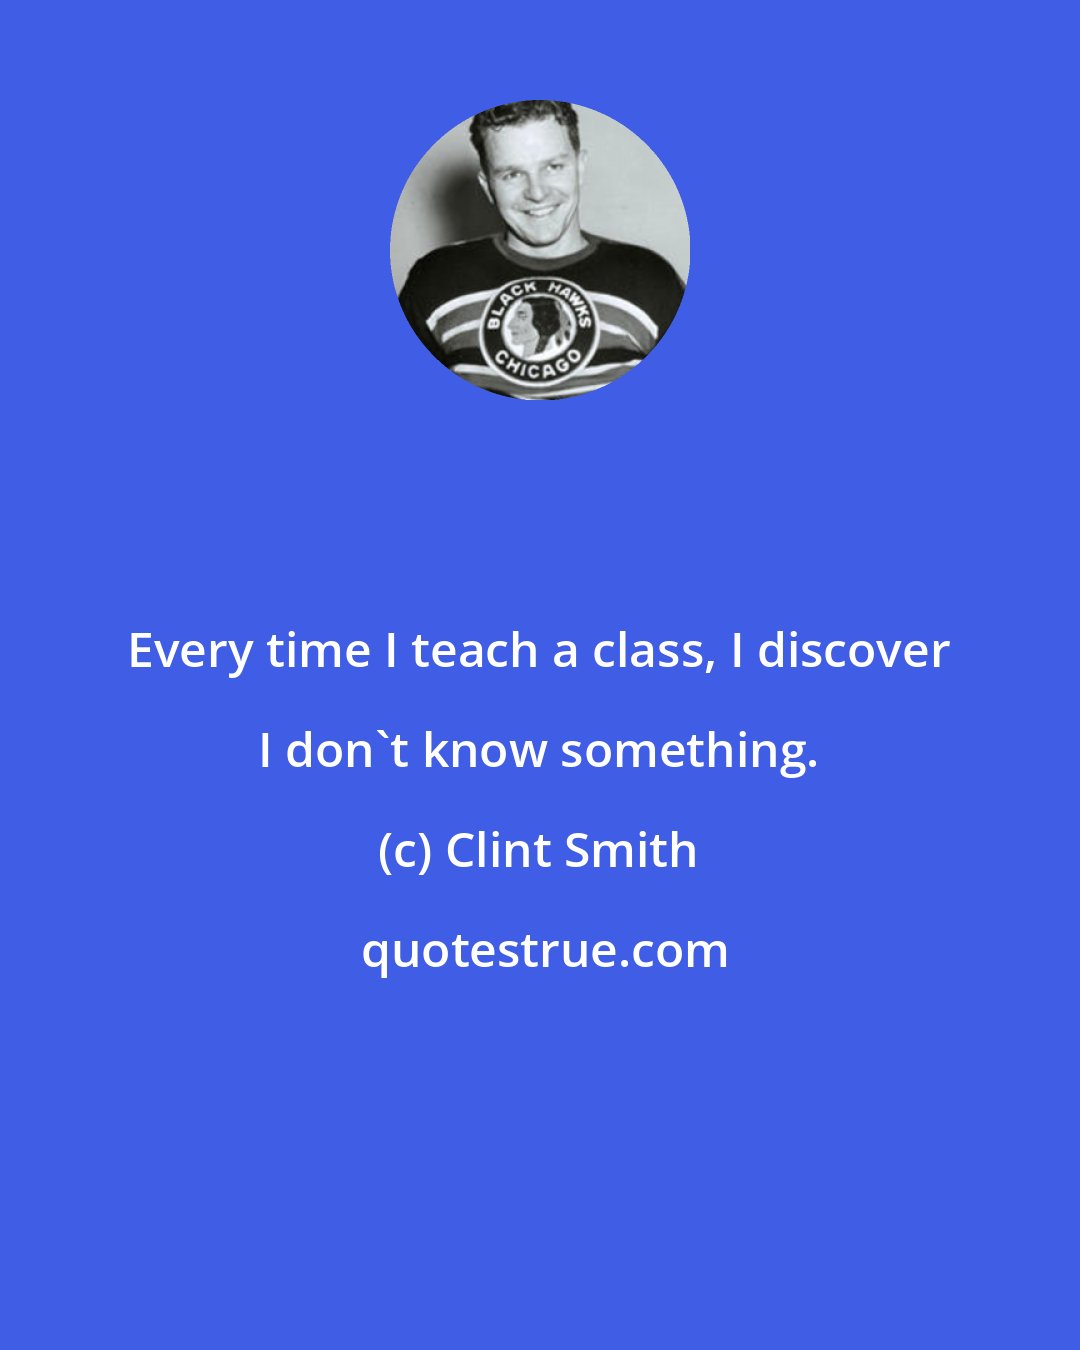 Clint Smith: Every time I teach a class, I discover I don't know something.